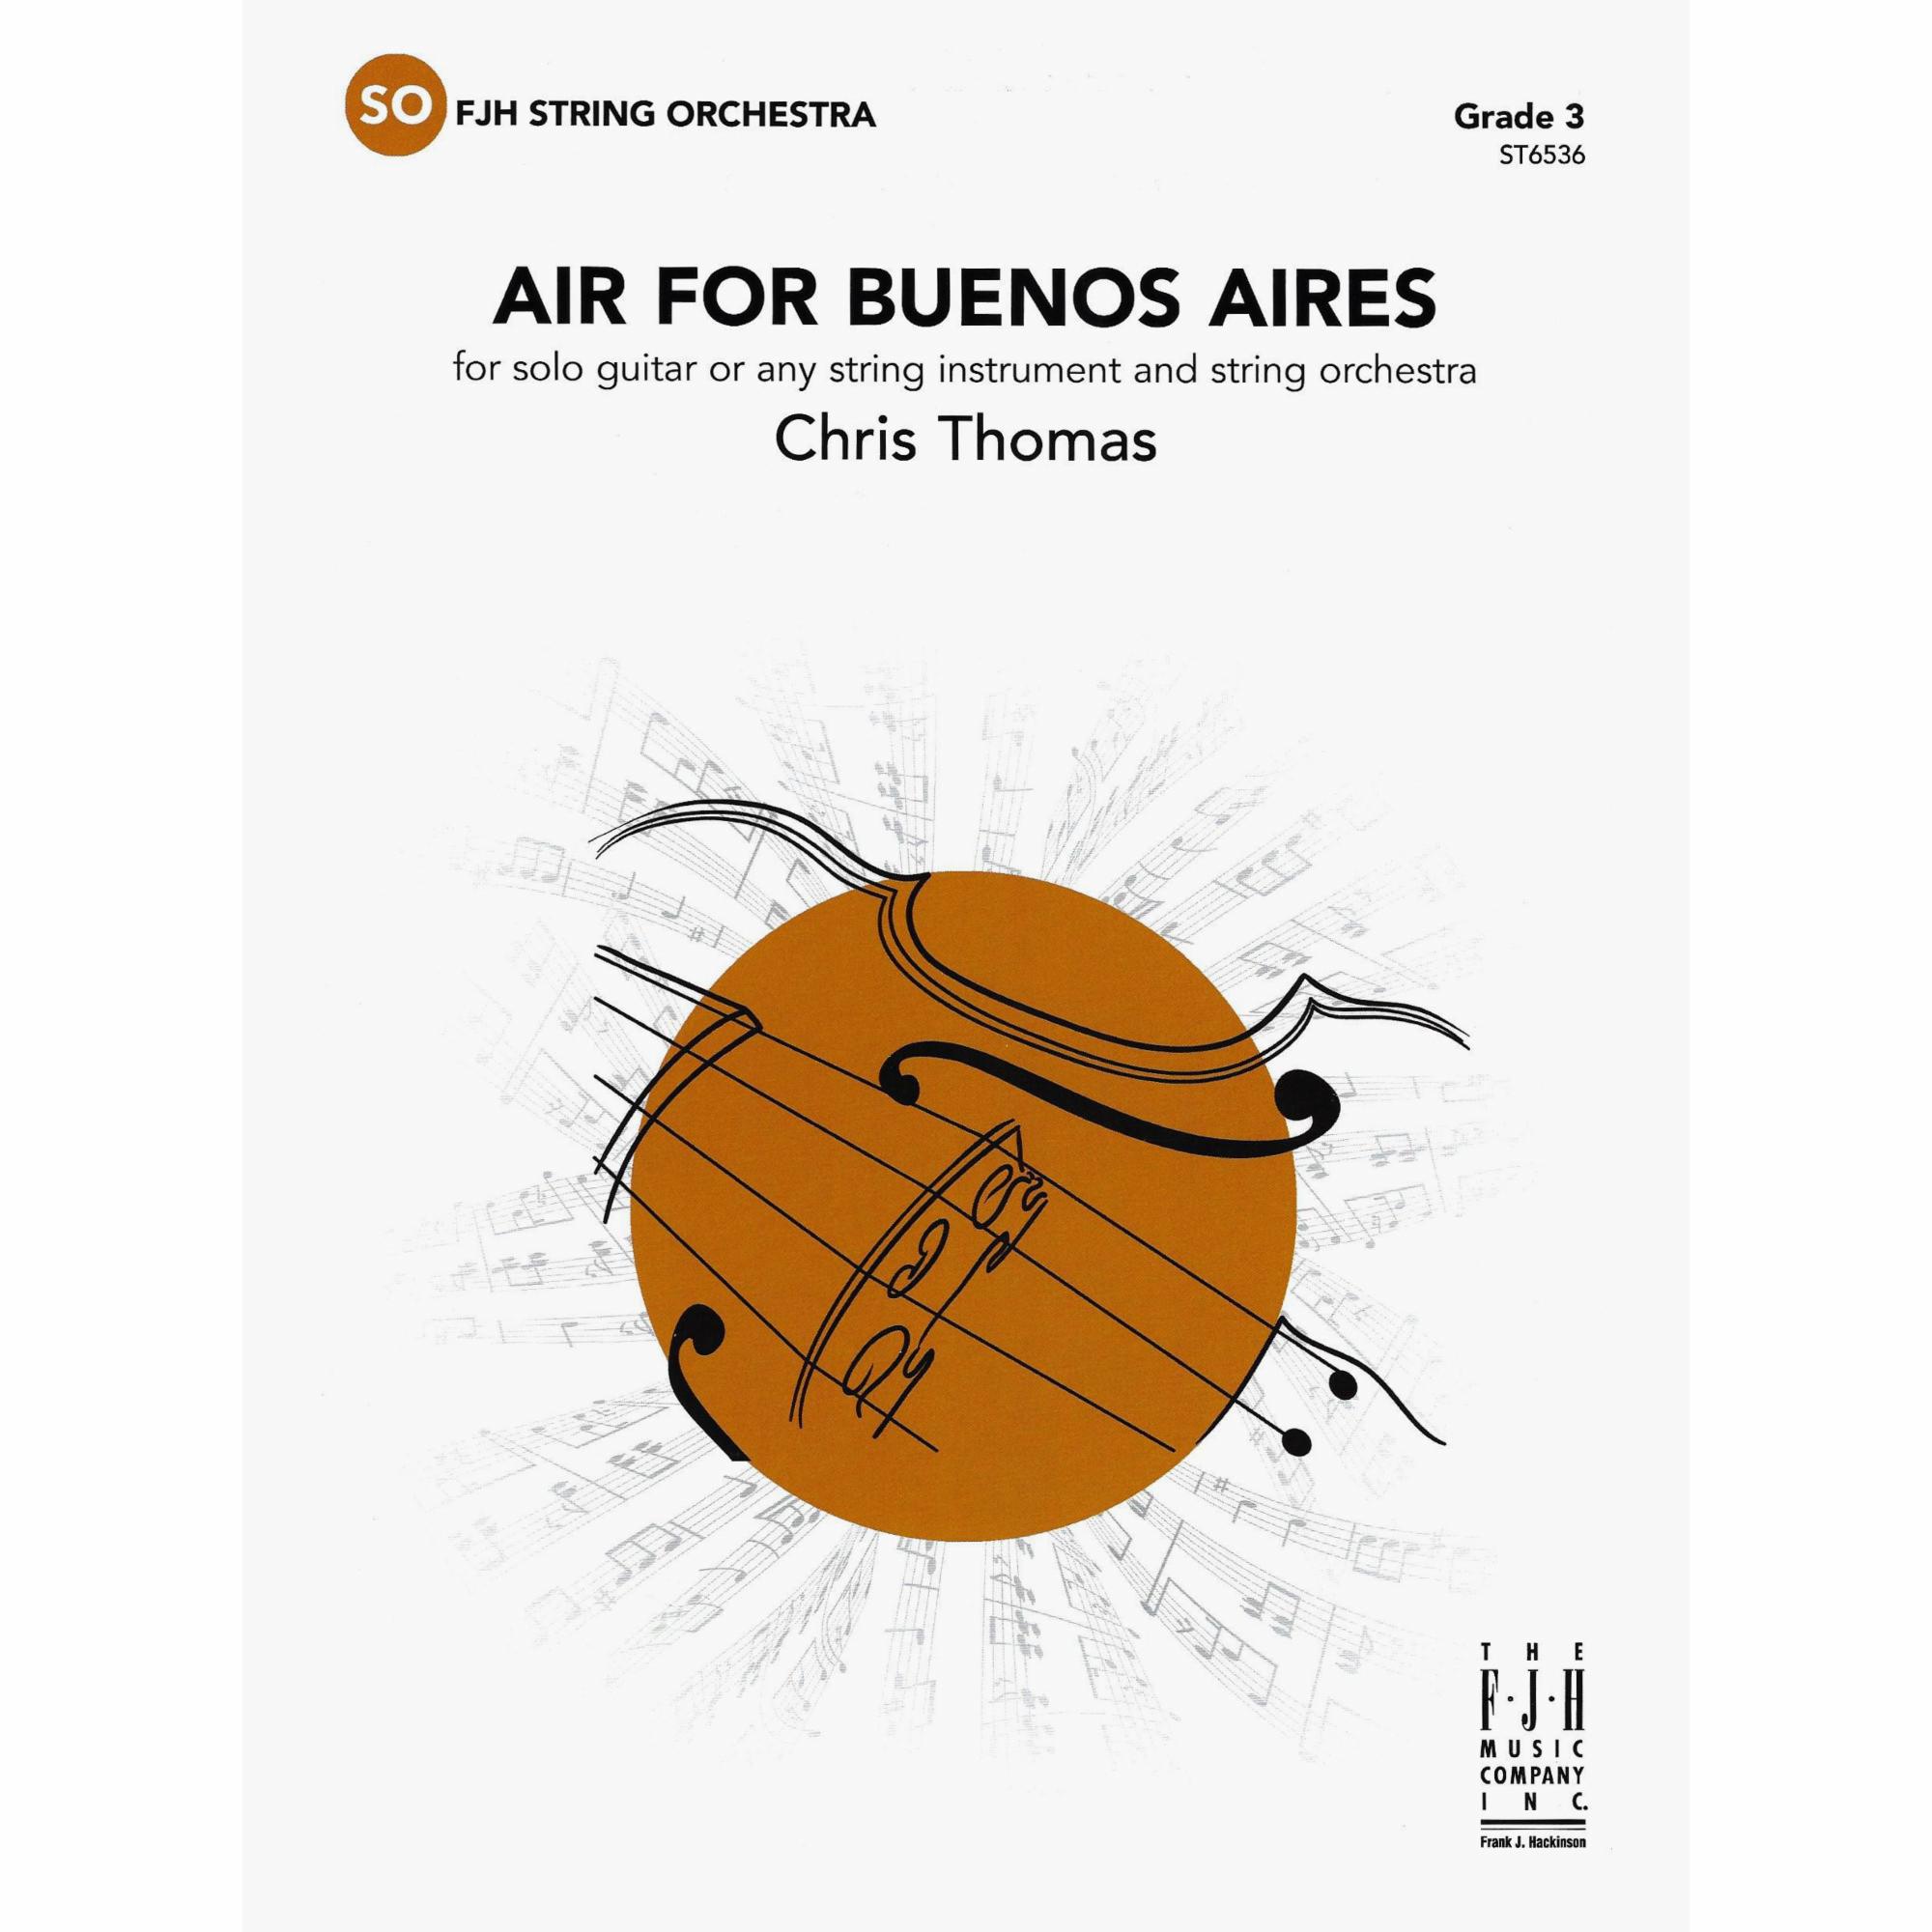 Air for Buenos Aires for String Orchestra